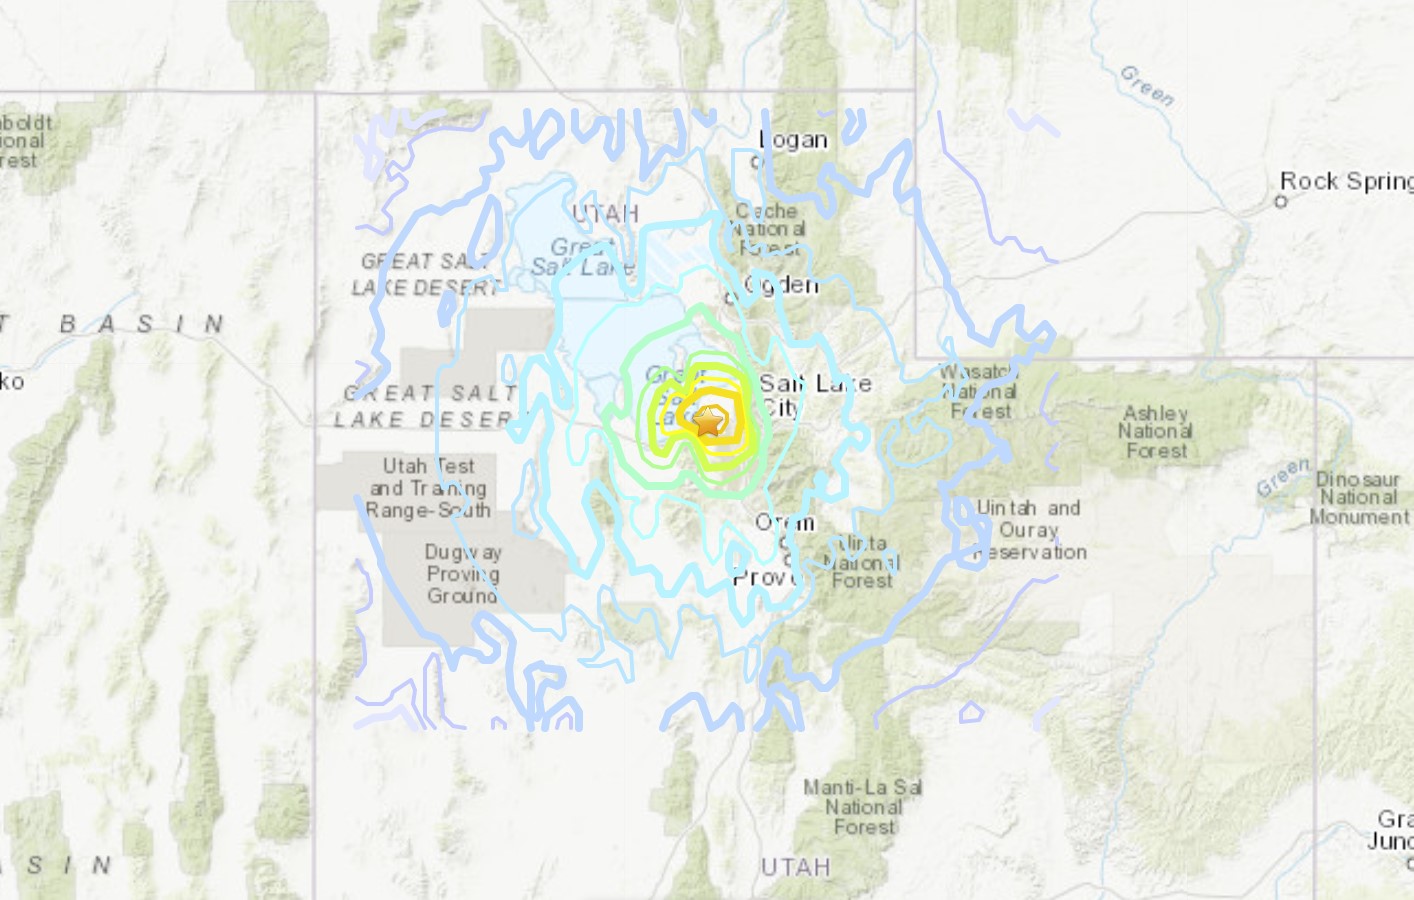 M5.7 earthquake shakes Utah on March 18, 2020 - Largest earthquake since 1992 - Strange Sounds